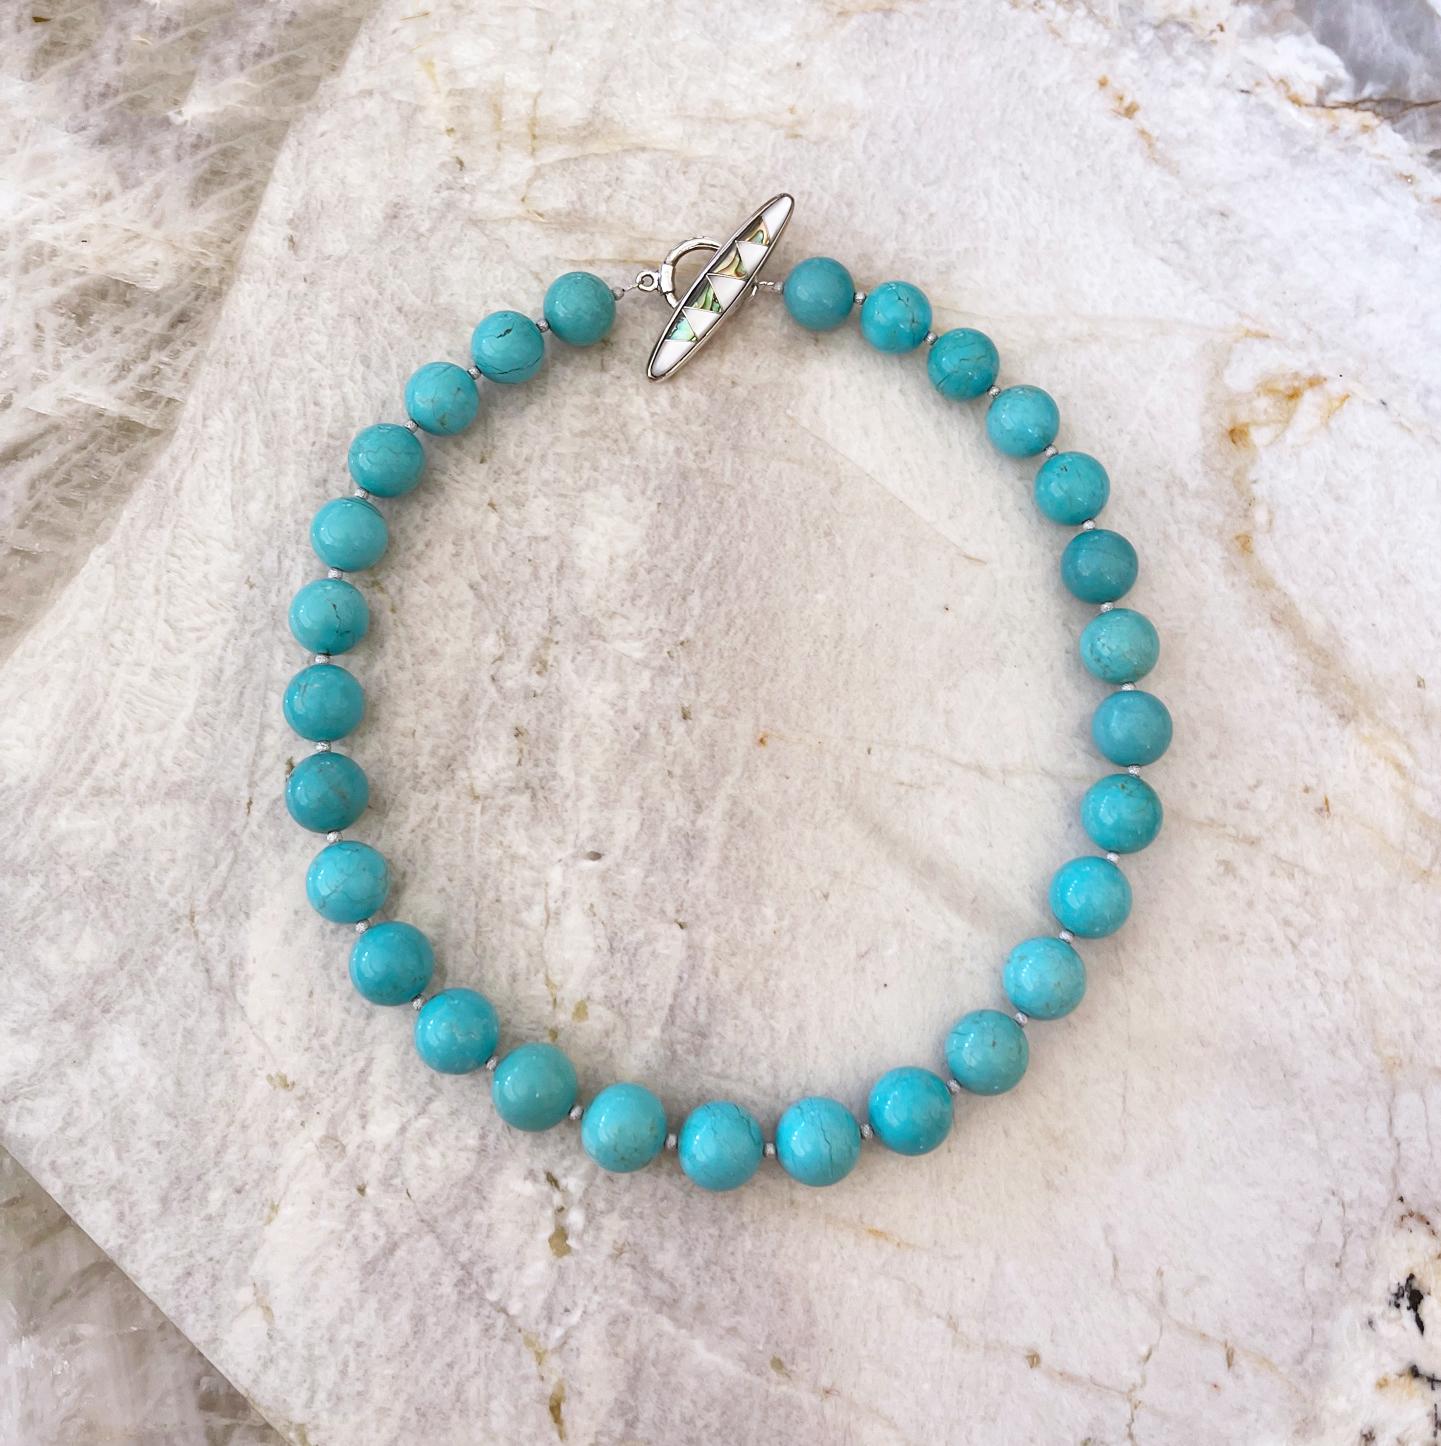 Nevada Number 8 Turquoise 14mm Round Beaded Necklace with Silver Inlay Clasp In New Condition For Sale In Tucson, AZ